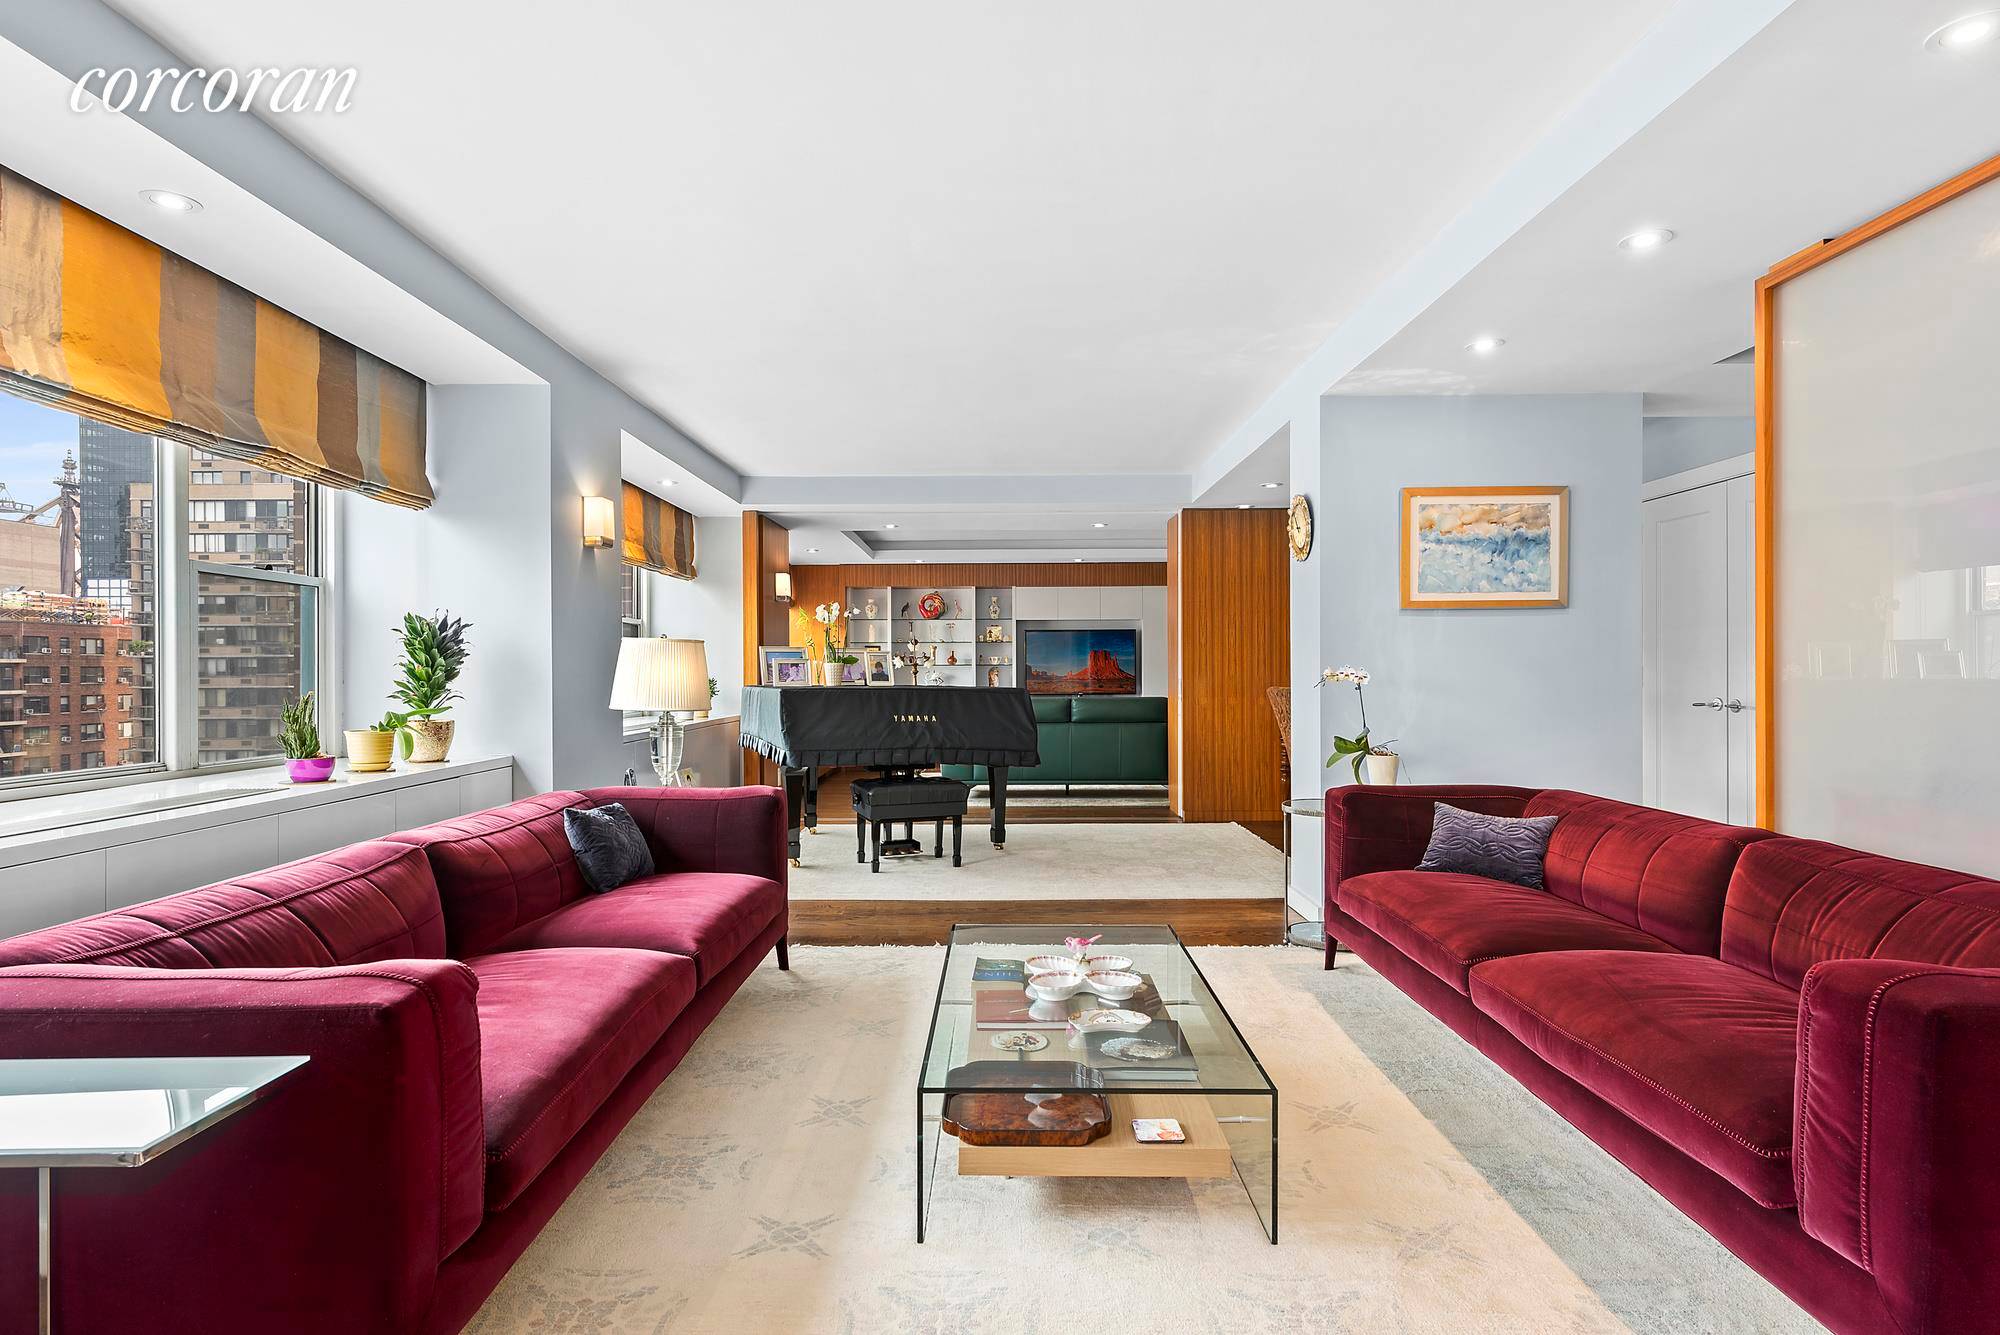 An absolutely stunning turnkey duplex with nearly 3, 000 square feet of impeccably designed and renovated interiors.